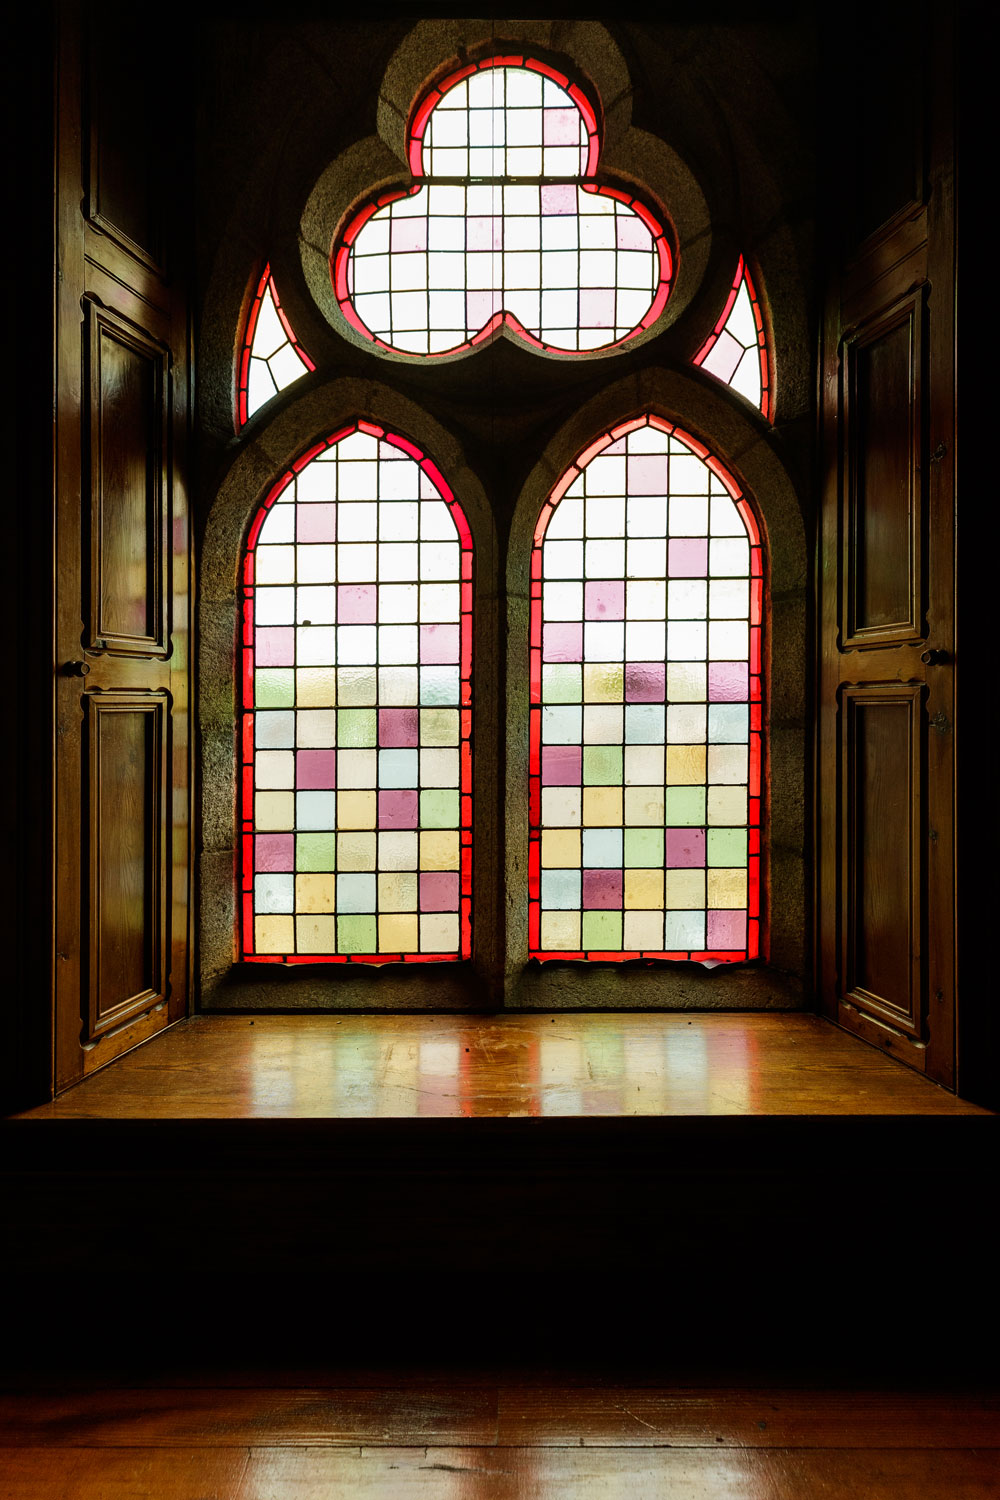 A stained glass window with uniquely-shaped panels flanked by wooden shutters and a large window seat.